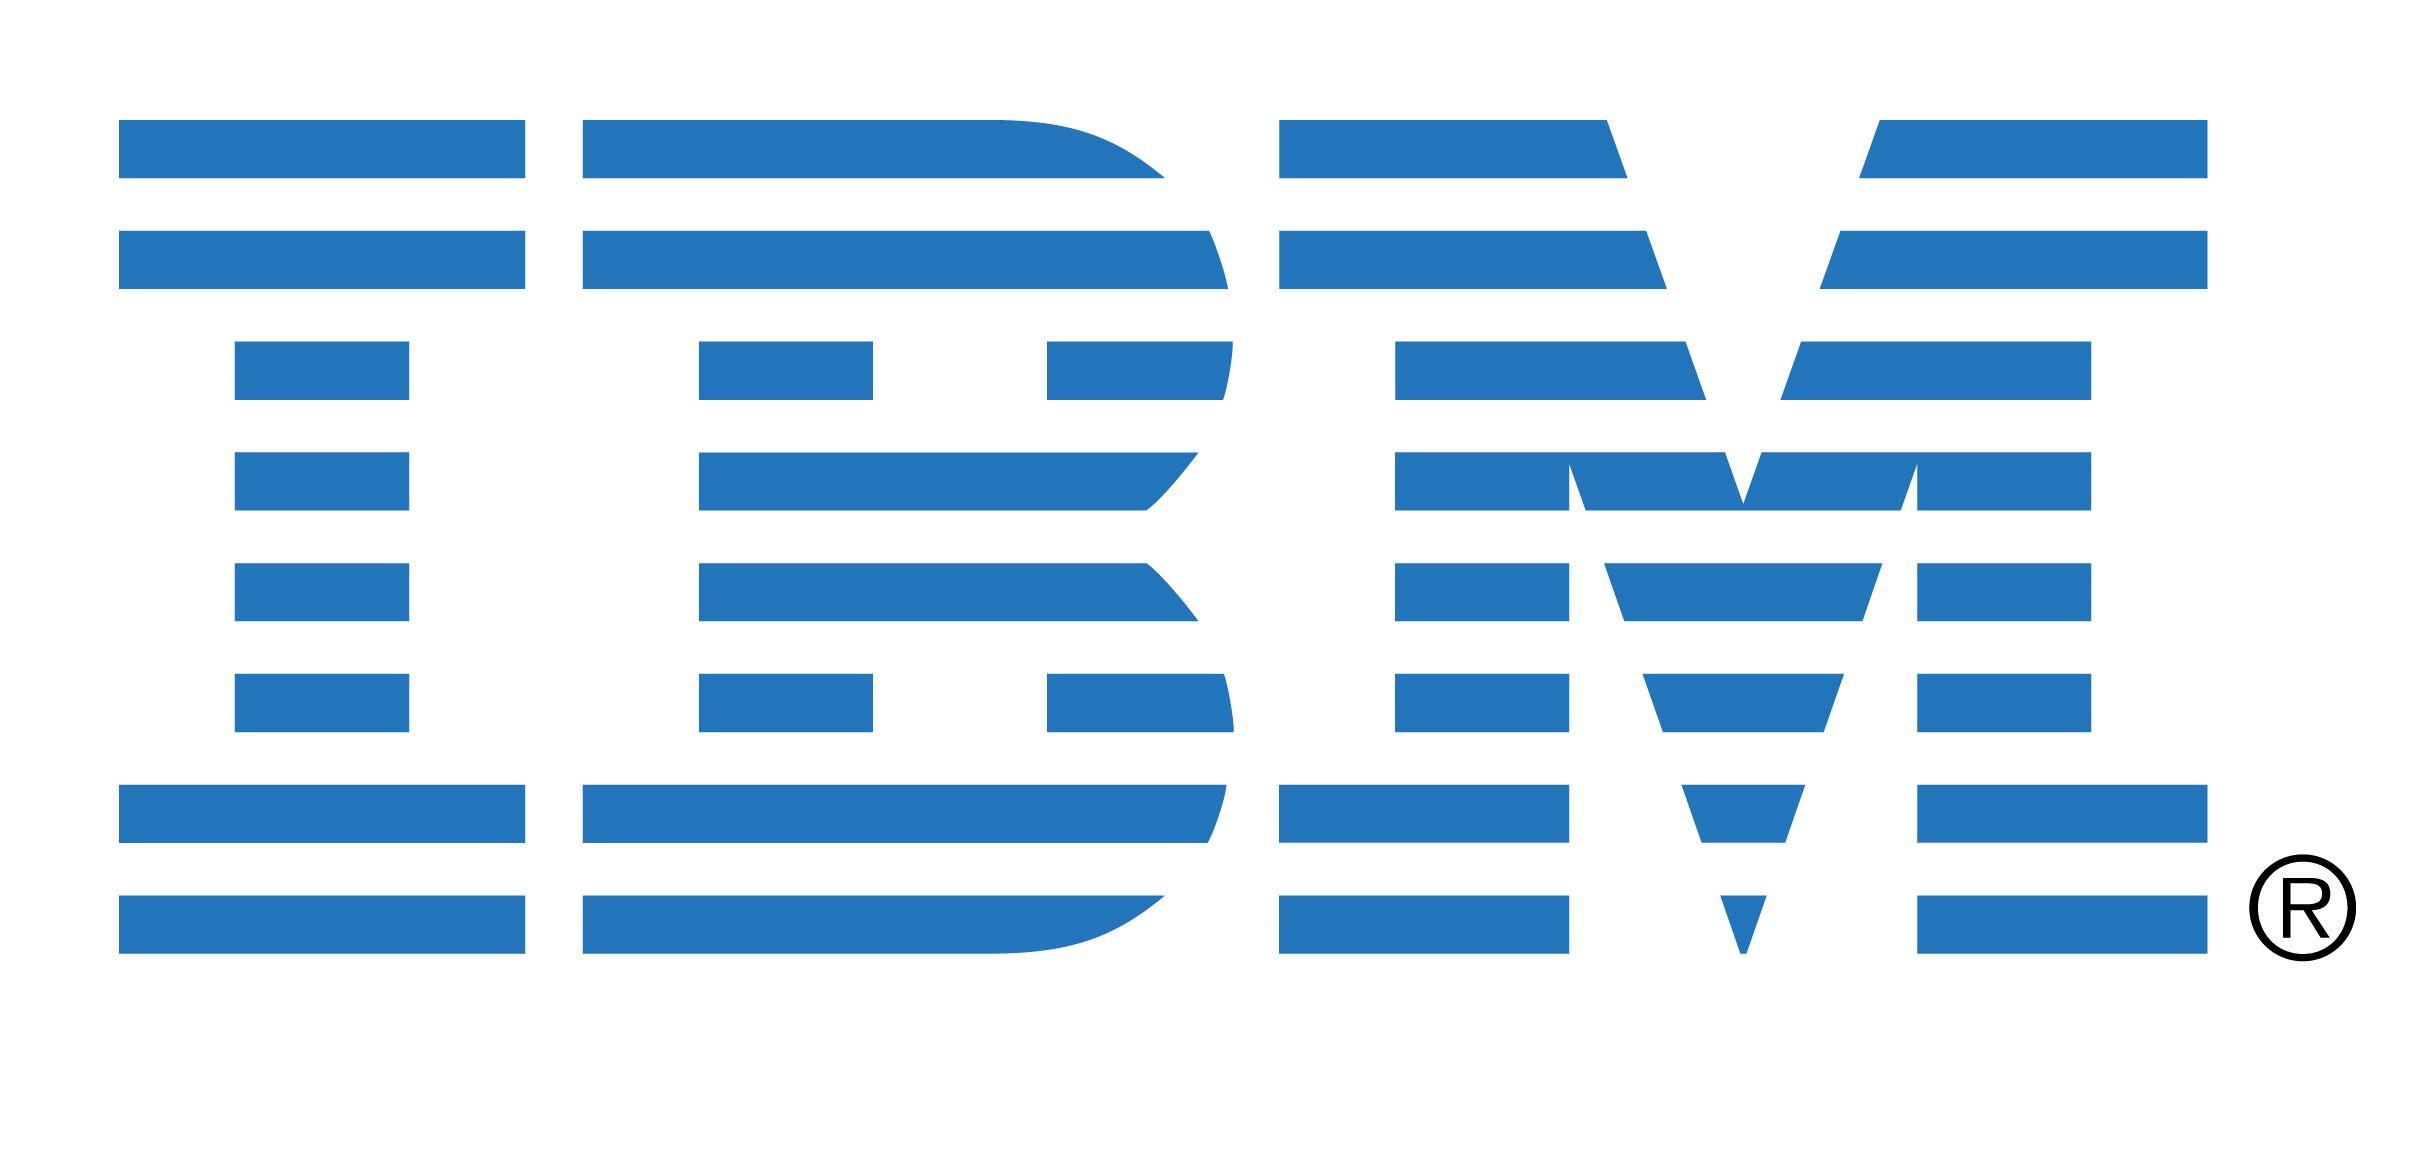 Old IBM Logo - Why International Business Machines Corp. Shares Jumped 10% Higher